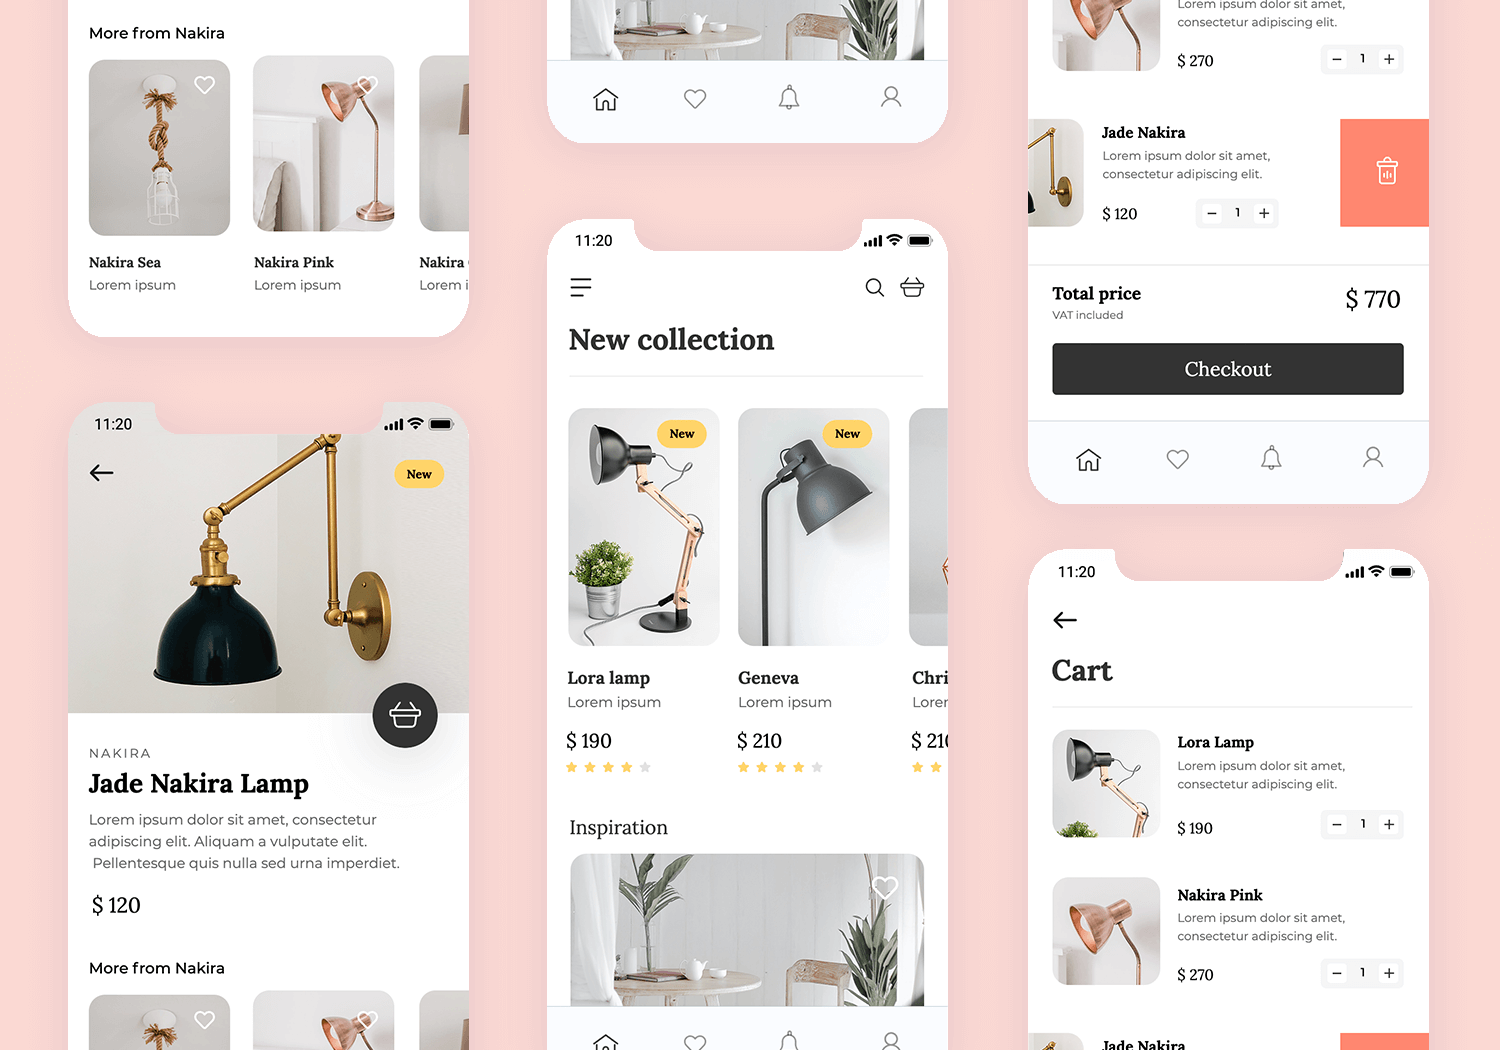 E-commerce app mockup for buying lamps. Includes product listings, detailed views, cart, and checkout